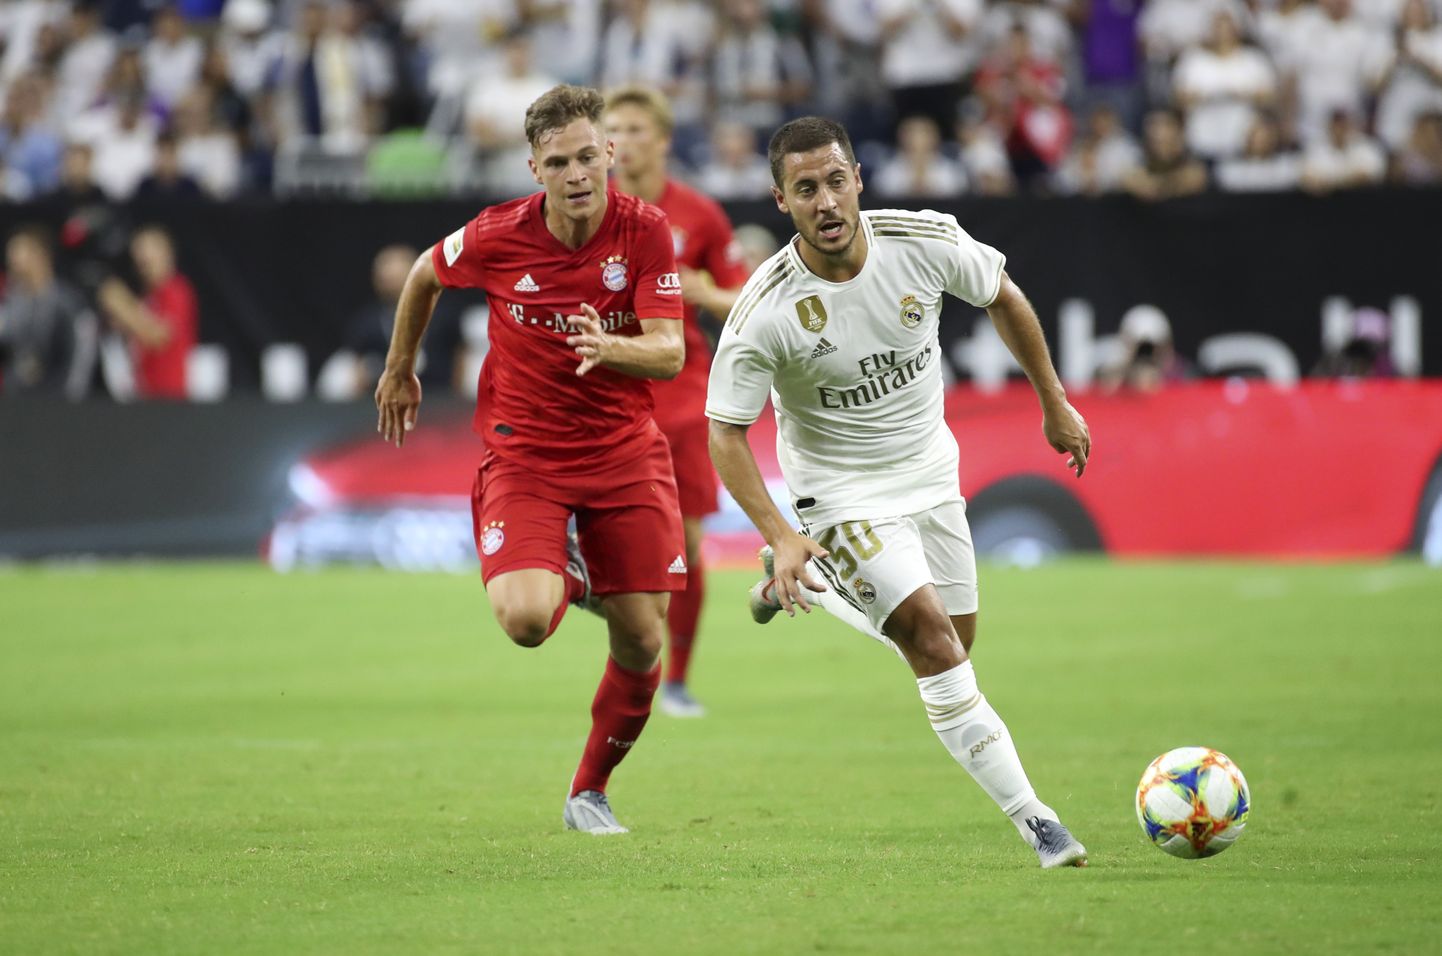 Jul 20, 2019; Houston, TX, USA; Real Madrid forward Eden Hazard (50) controls the ball as Bayern Munich defender Joshua Kimmich (32) chases during the first half of the International Champions Cup soccer series at NRG Stadium. Mandatory Credit: Kevin Jairaj-USA TODAY Sports